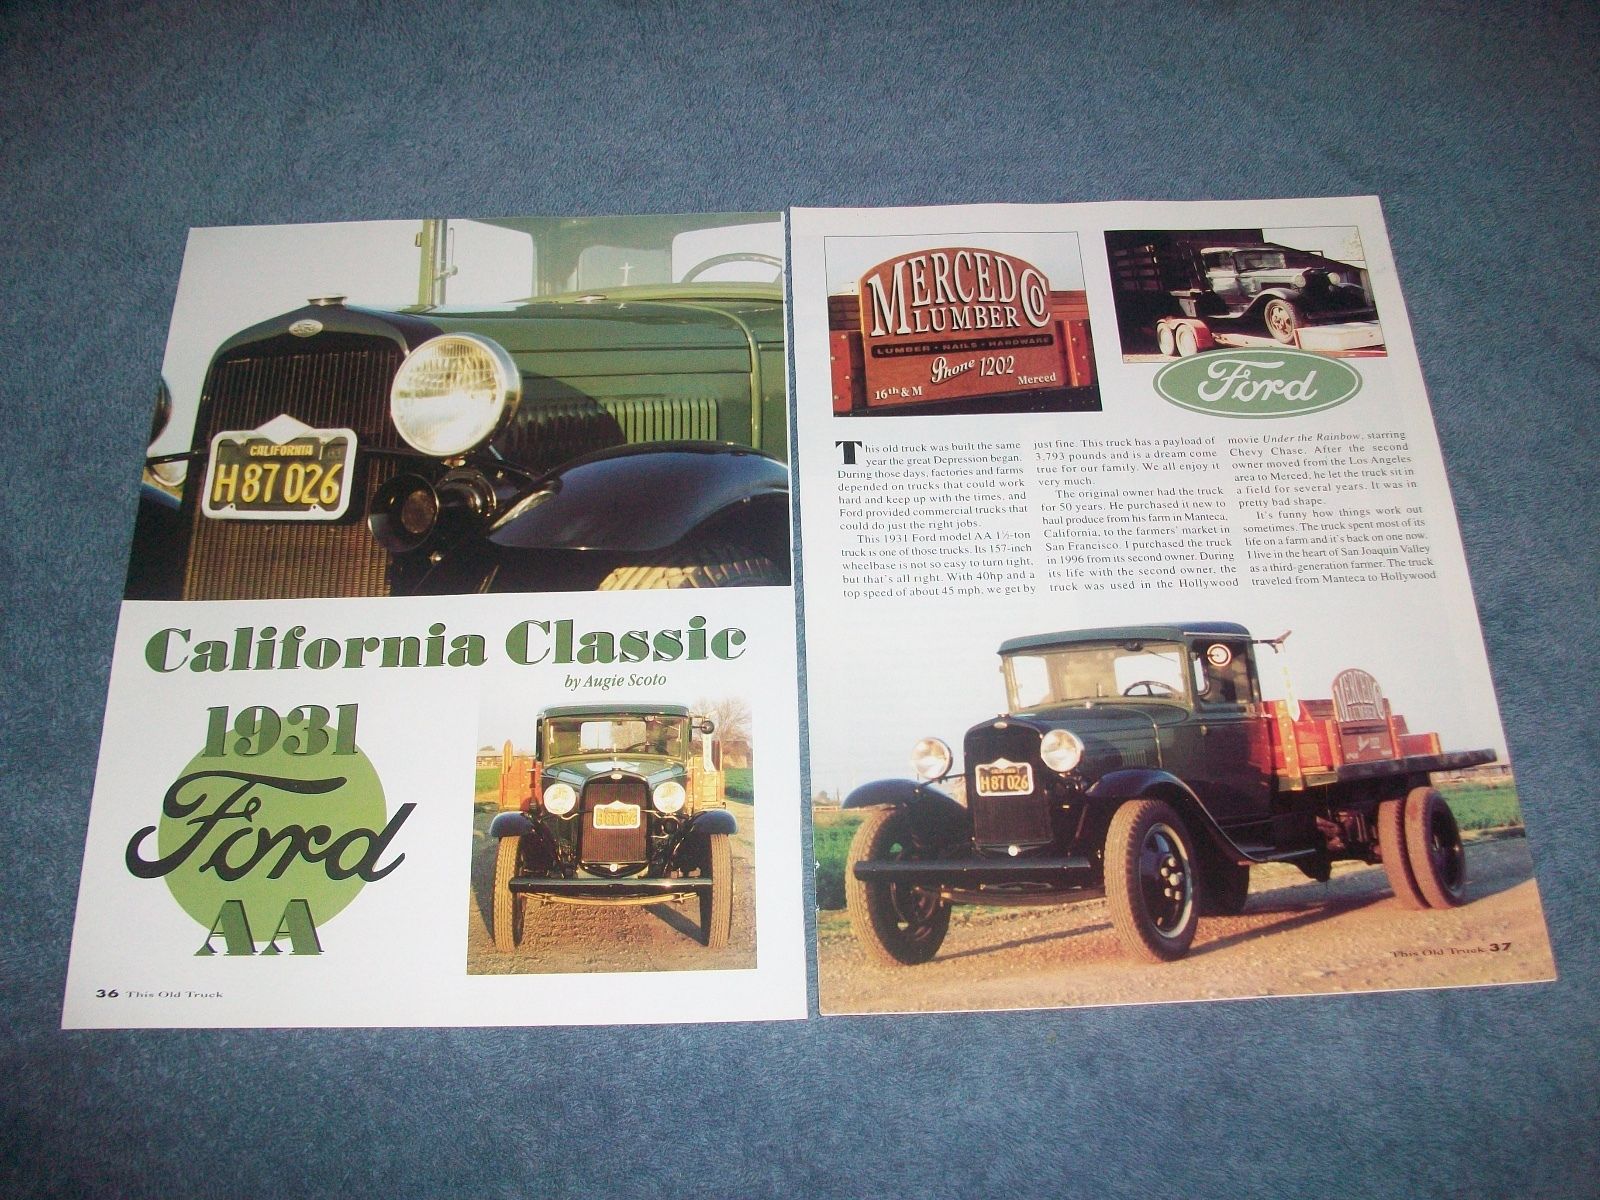 California Classic from This Old Truck magazine page 1/2